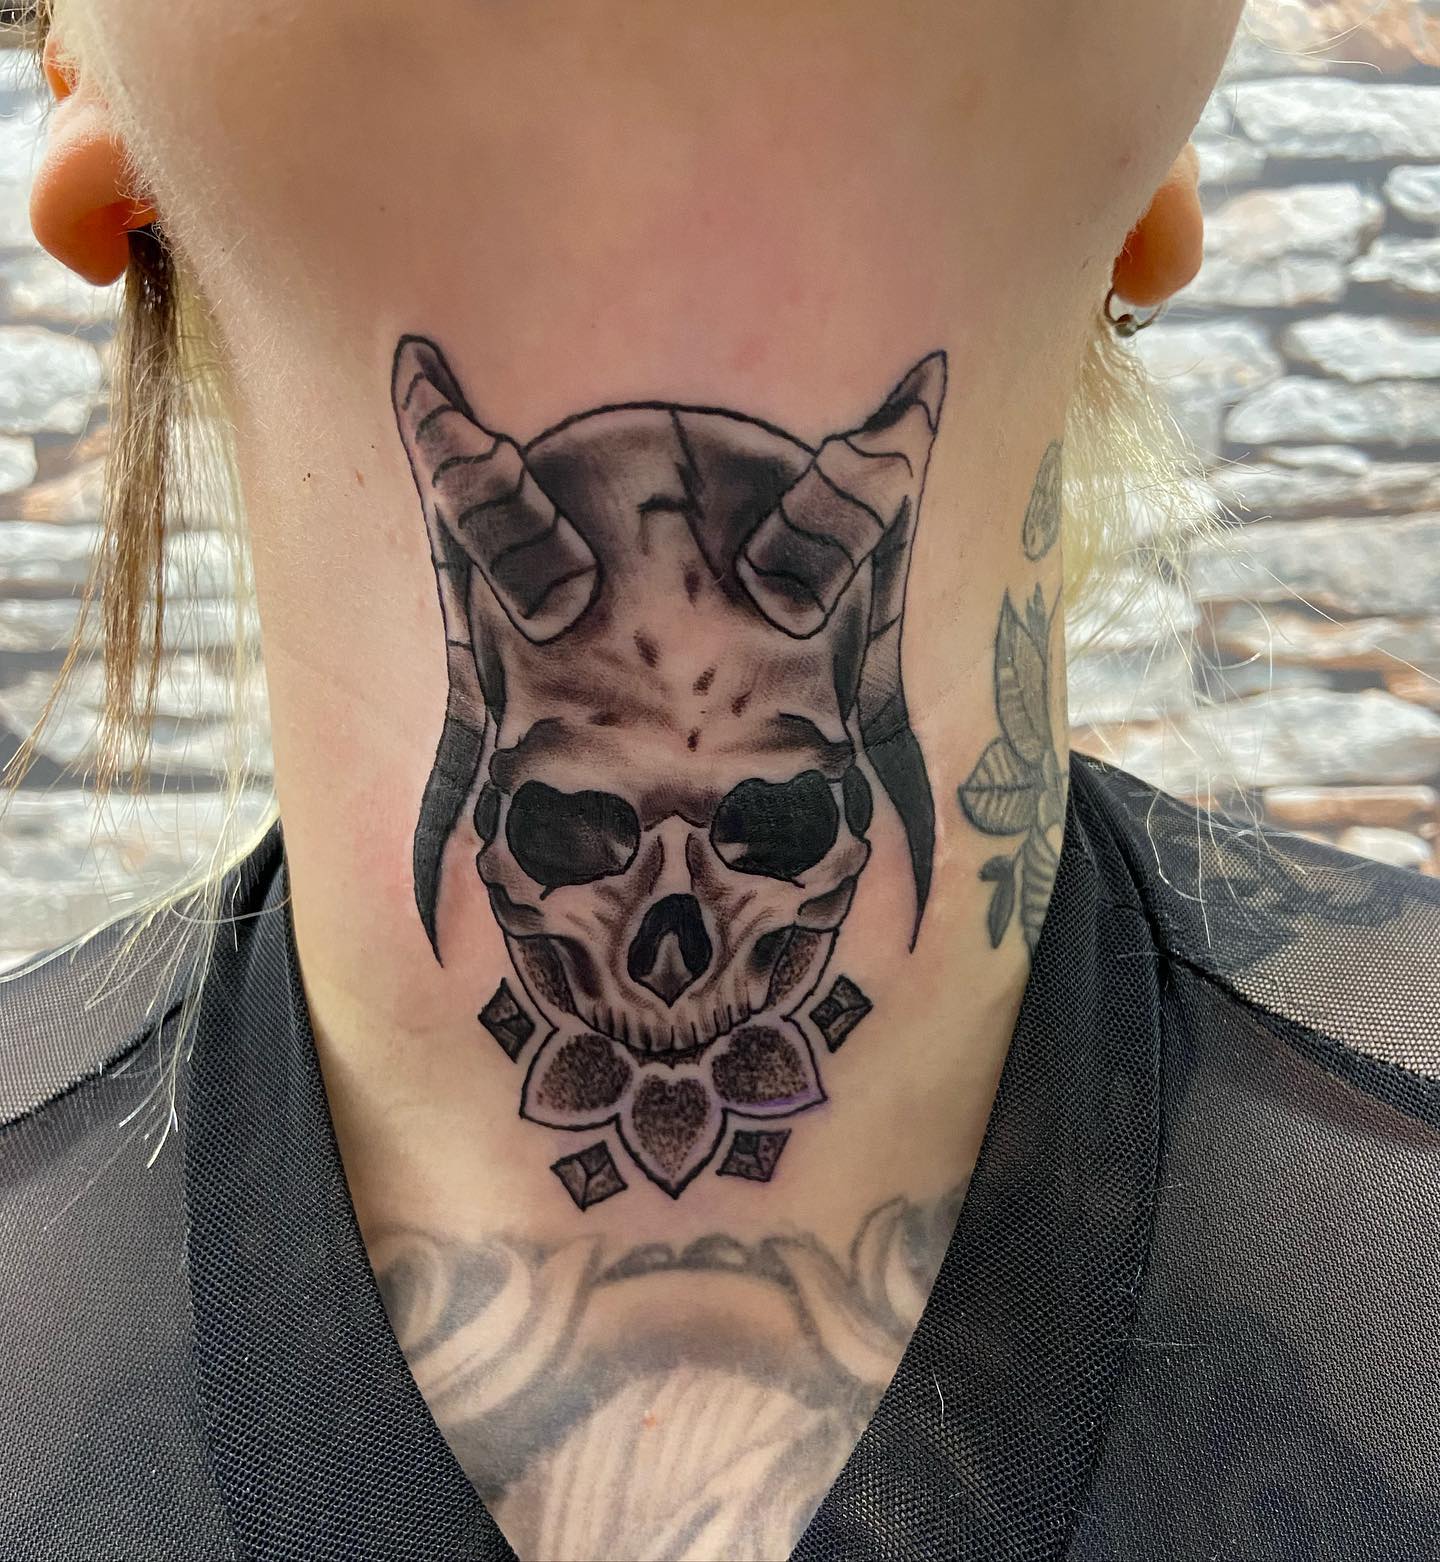 Skull tattoos can be a great companion on your body if you like creepy designs. In this tattoo, a horned black skull is combined with nicely done shadow details and lines. Those who love this kind of skull tattoos should definitely try this tattoo out.